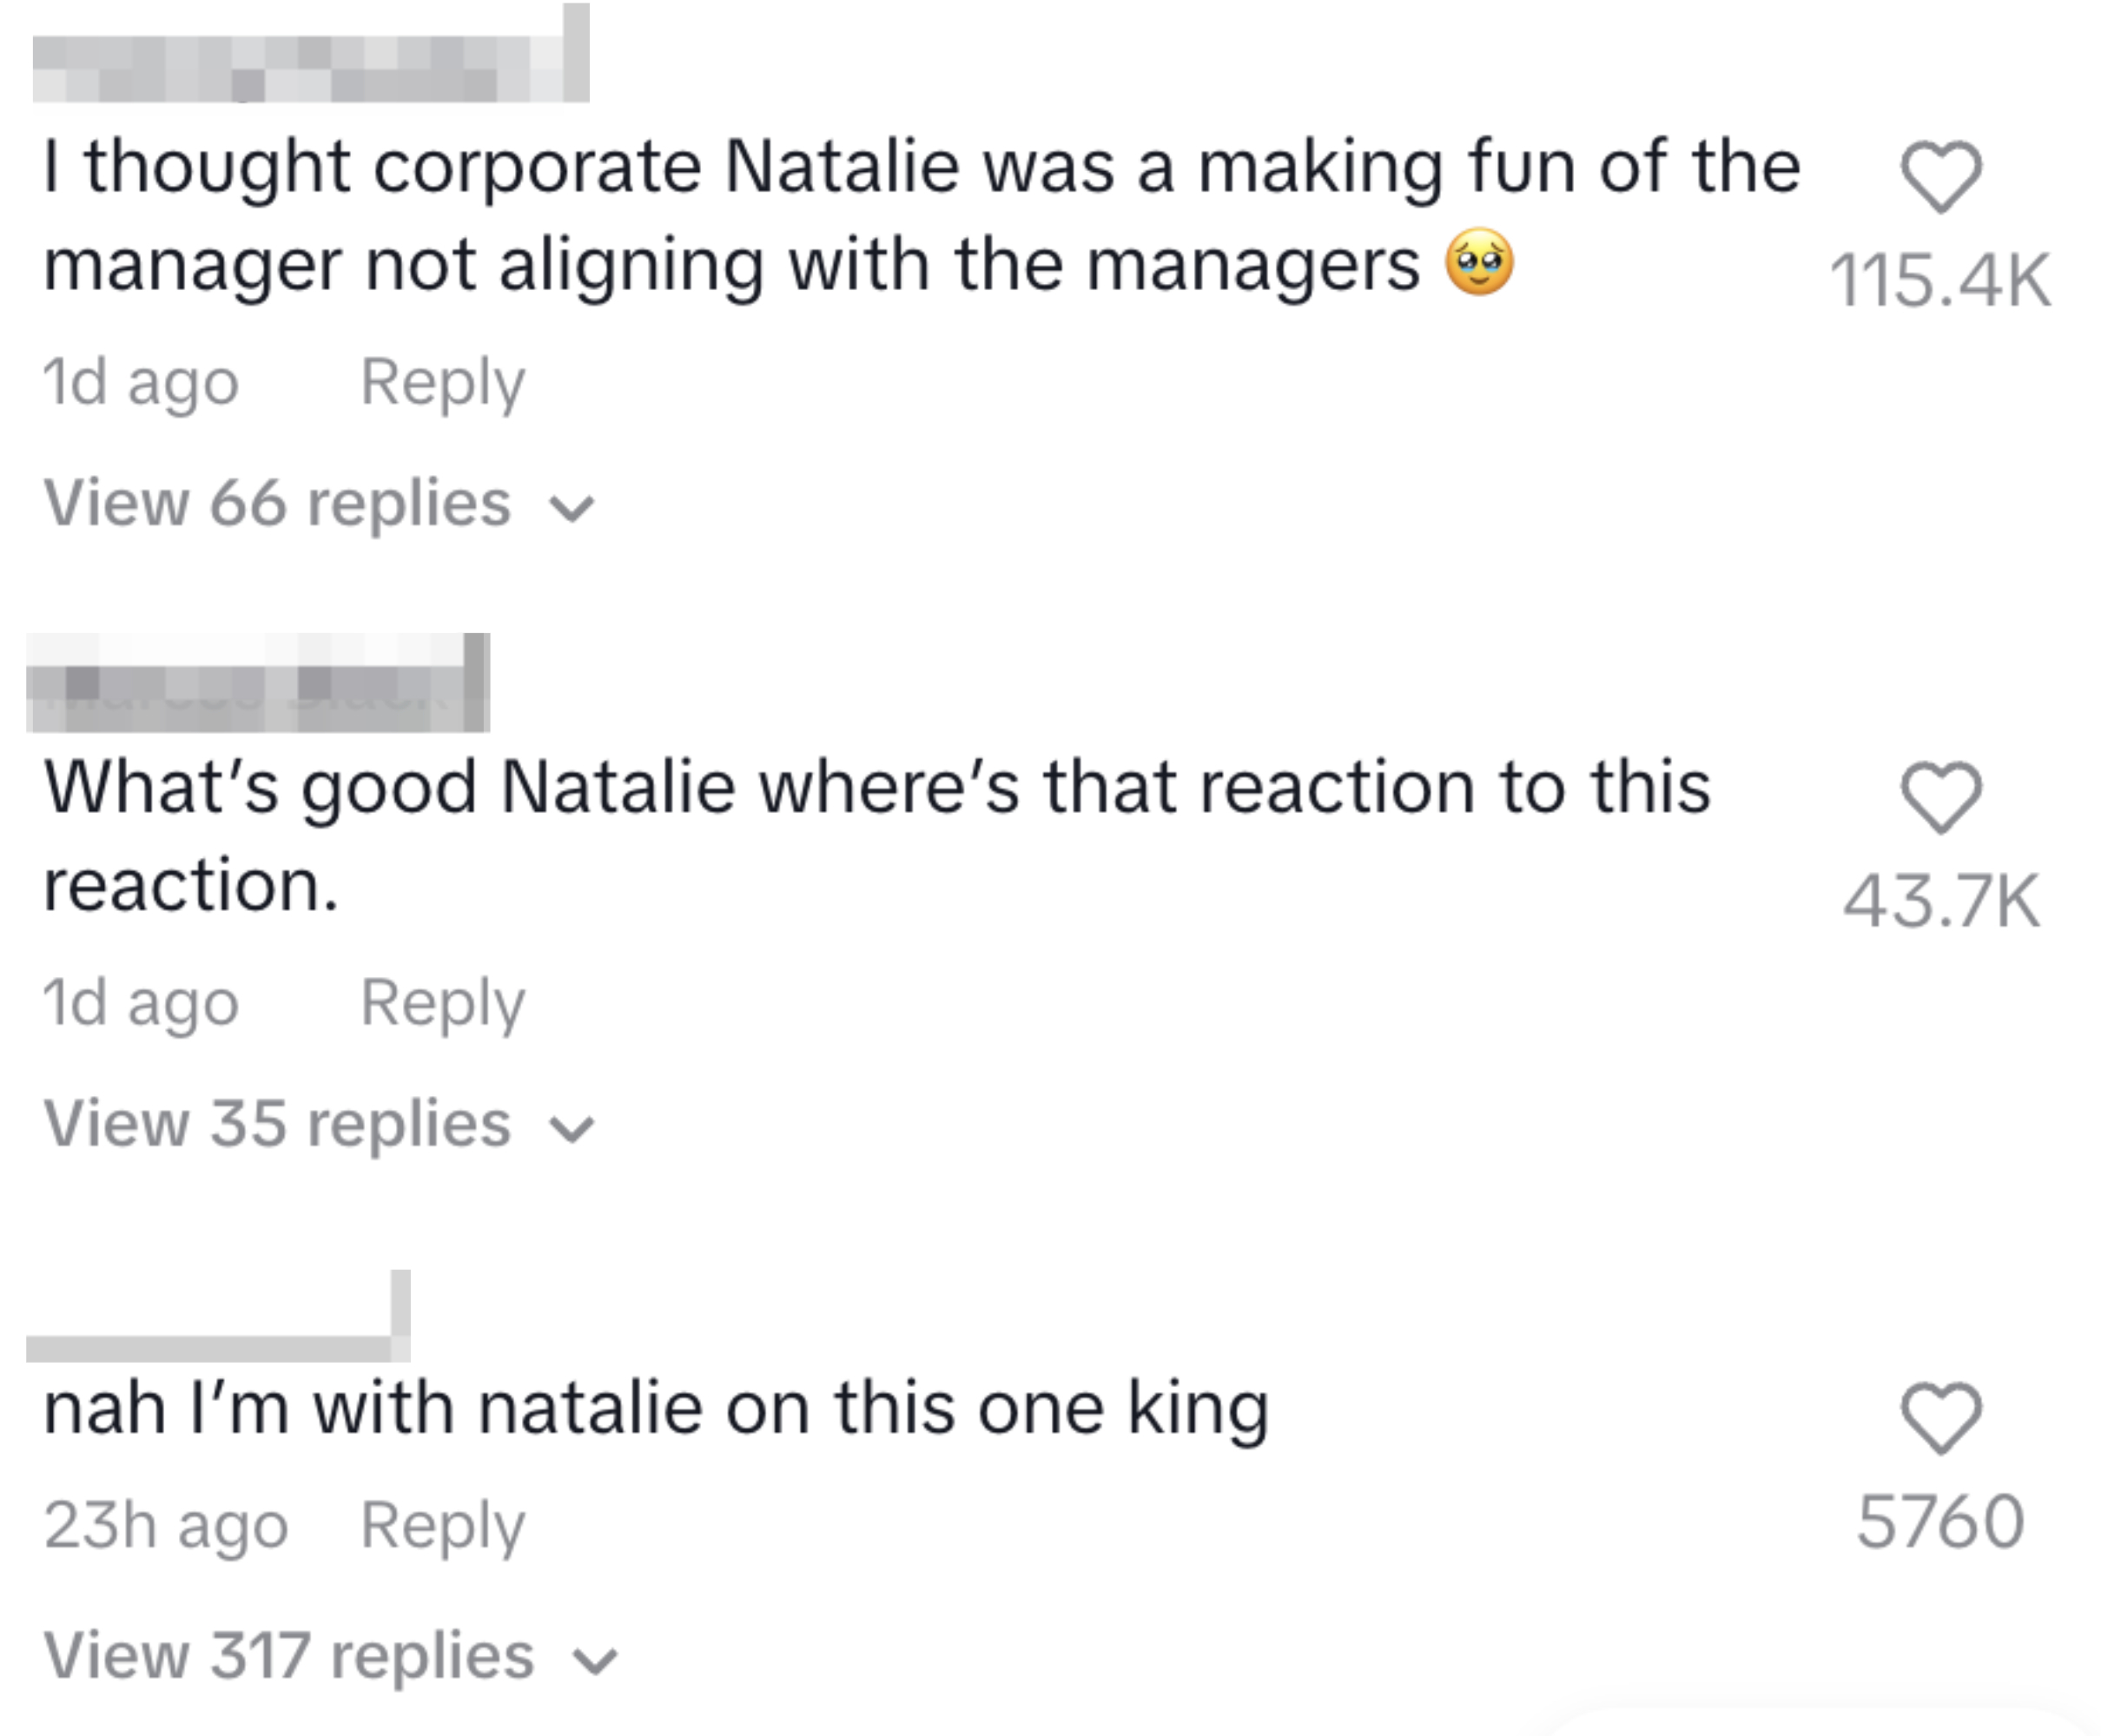 I thought corporate natalie was making fun of managers not aligning with them. What&#x27;s good Natalie where&#x27;s that reaction to this reaction. nah I&#x27;m with natalie on this one king